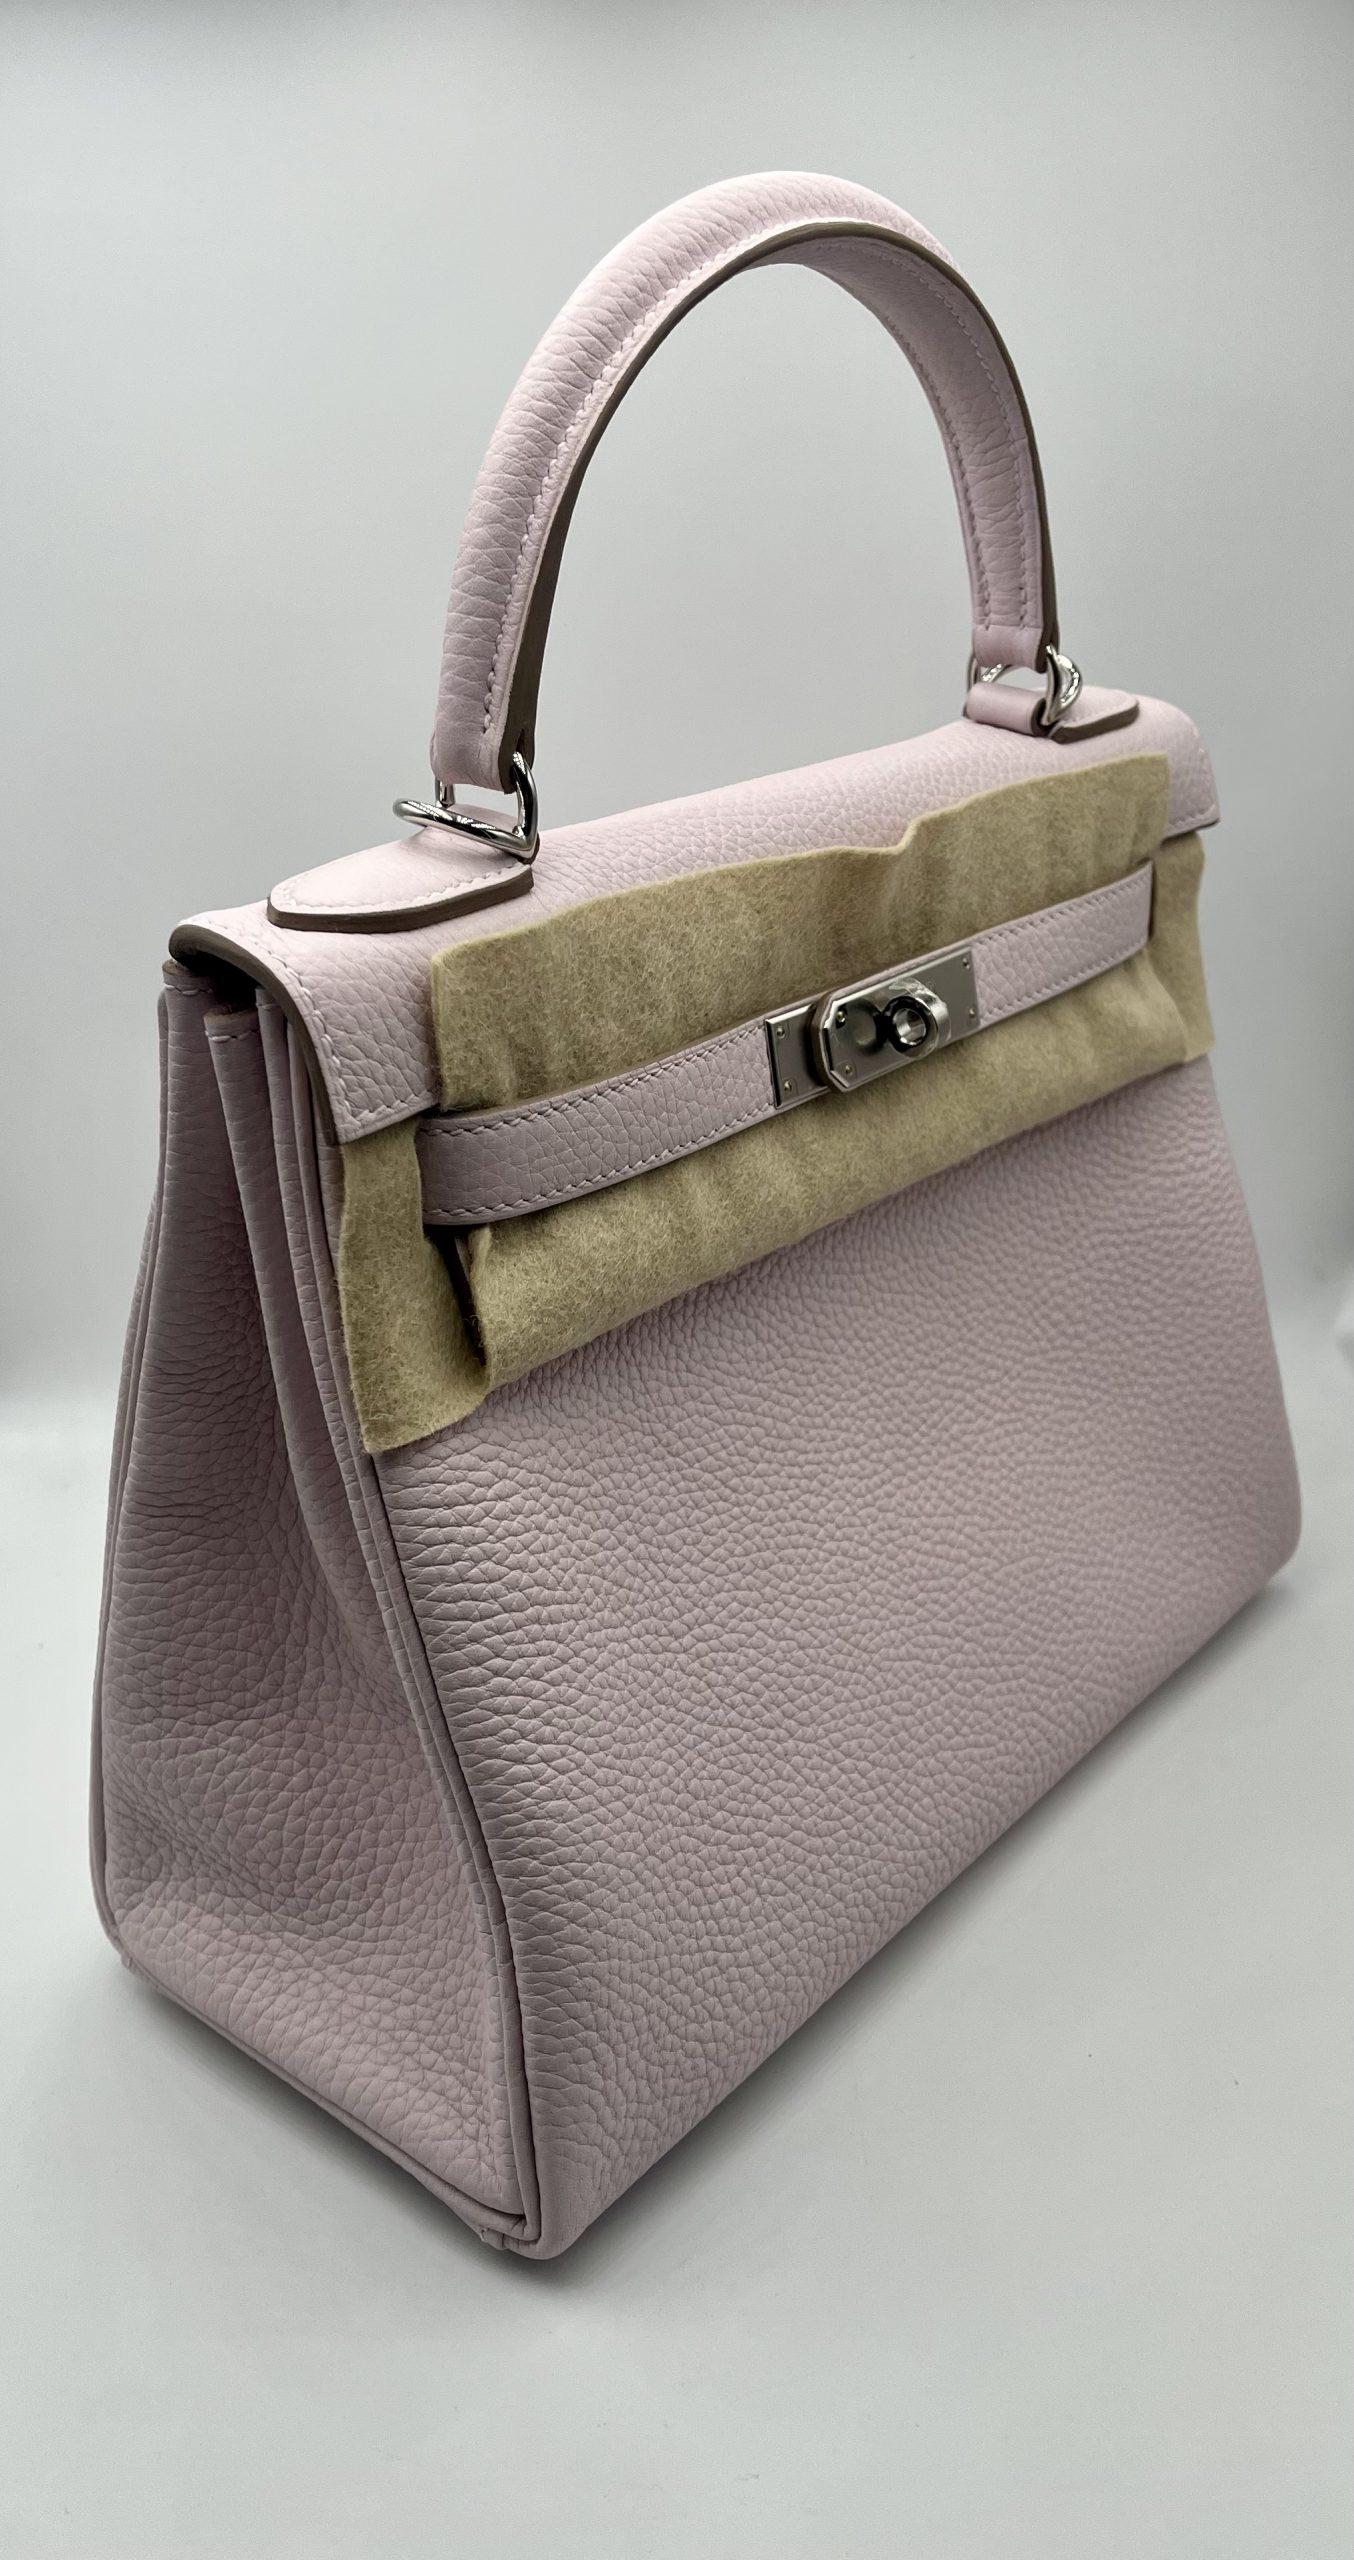 Hermes Kelly 28 Mauve Pale Clemence PHW B 2023 Full Set Gold Hardware 
New Never used. A Collectors Piece
Measurements : 22cm High x 28cm Wide x 10cm Deep
The Kelly bag came to success when it was first paparazzied on the bumpy belly of Princess